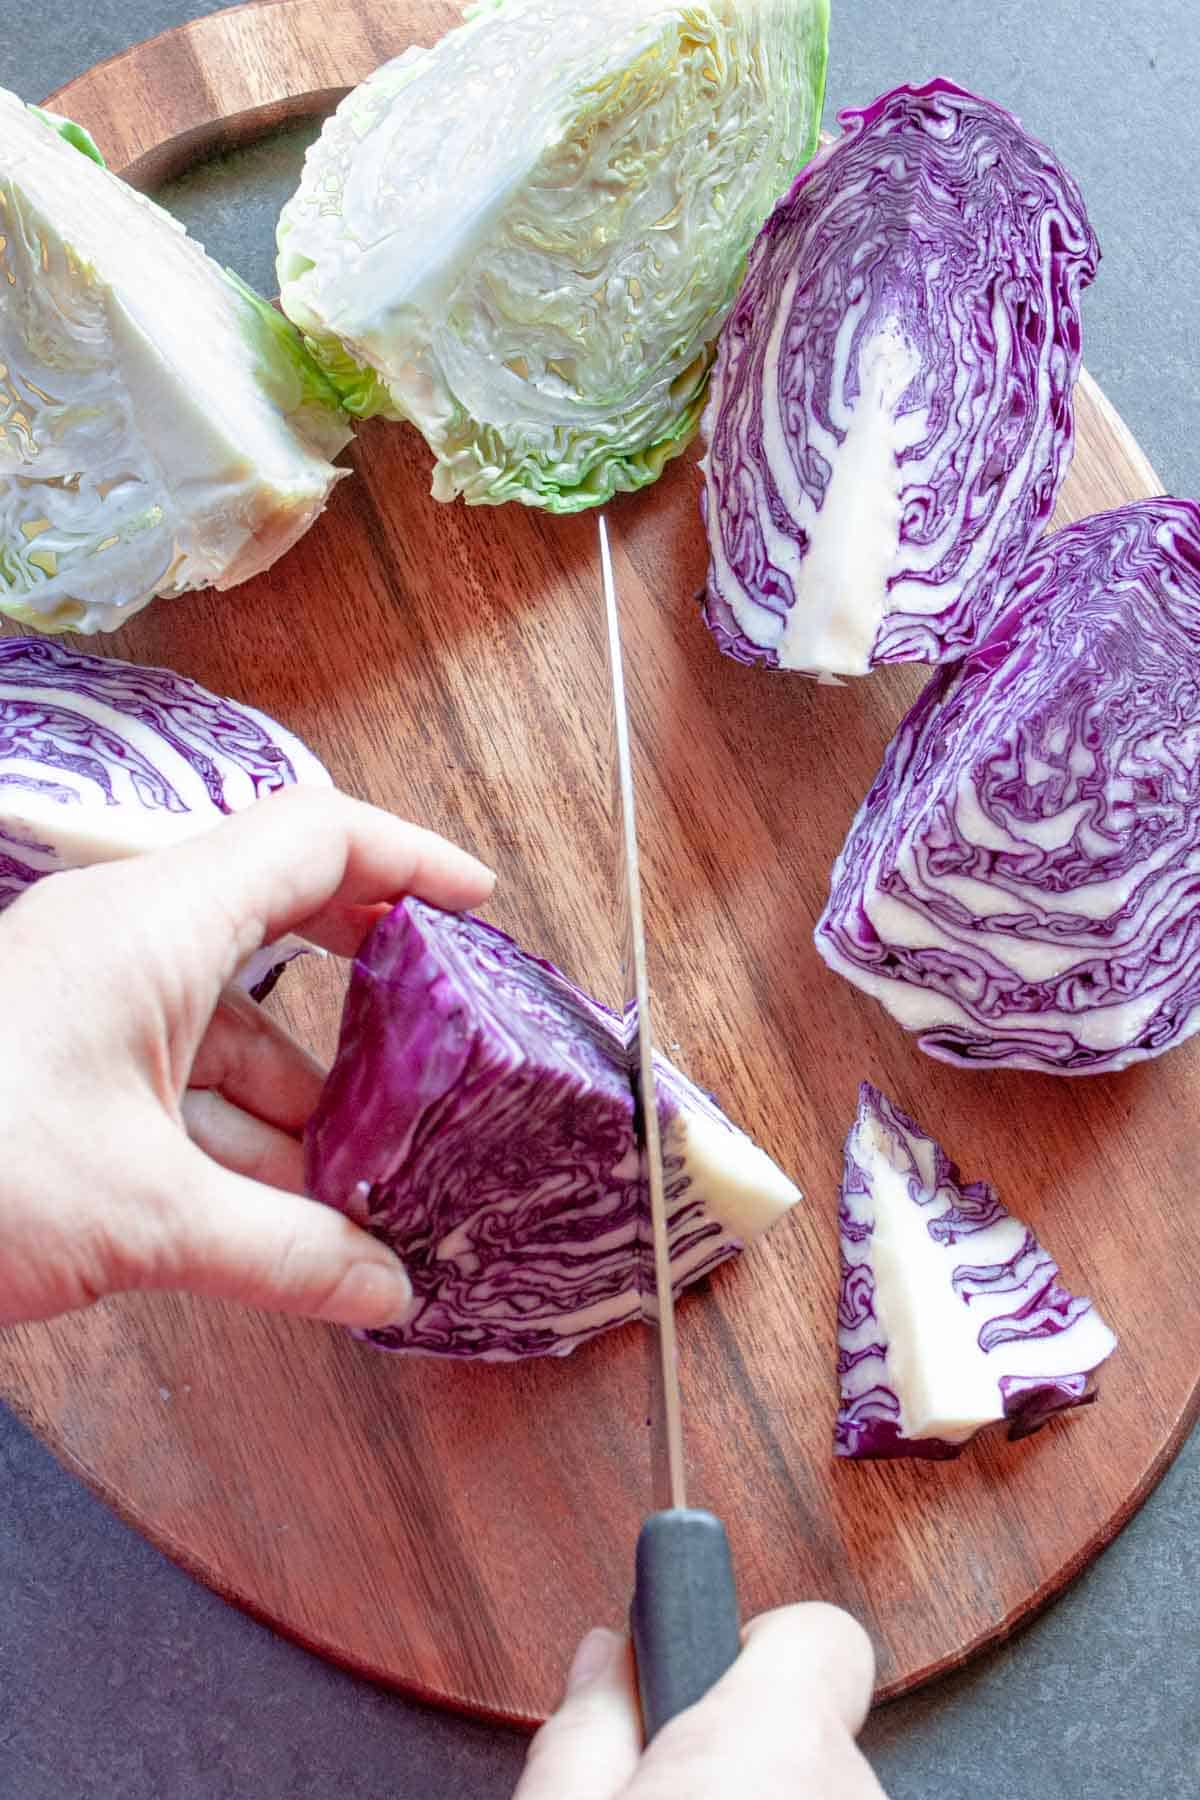 Red cabbage quarter of a head with the core being sliced off.